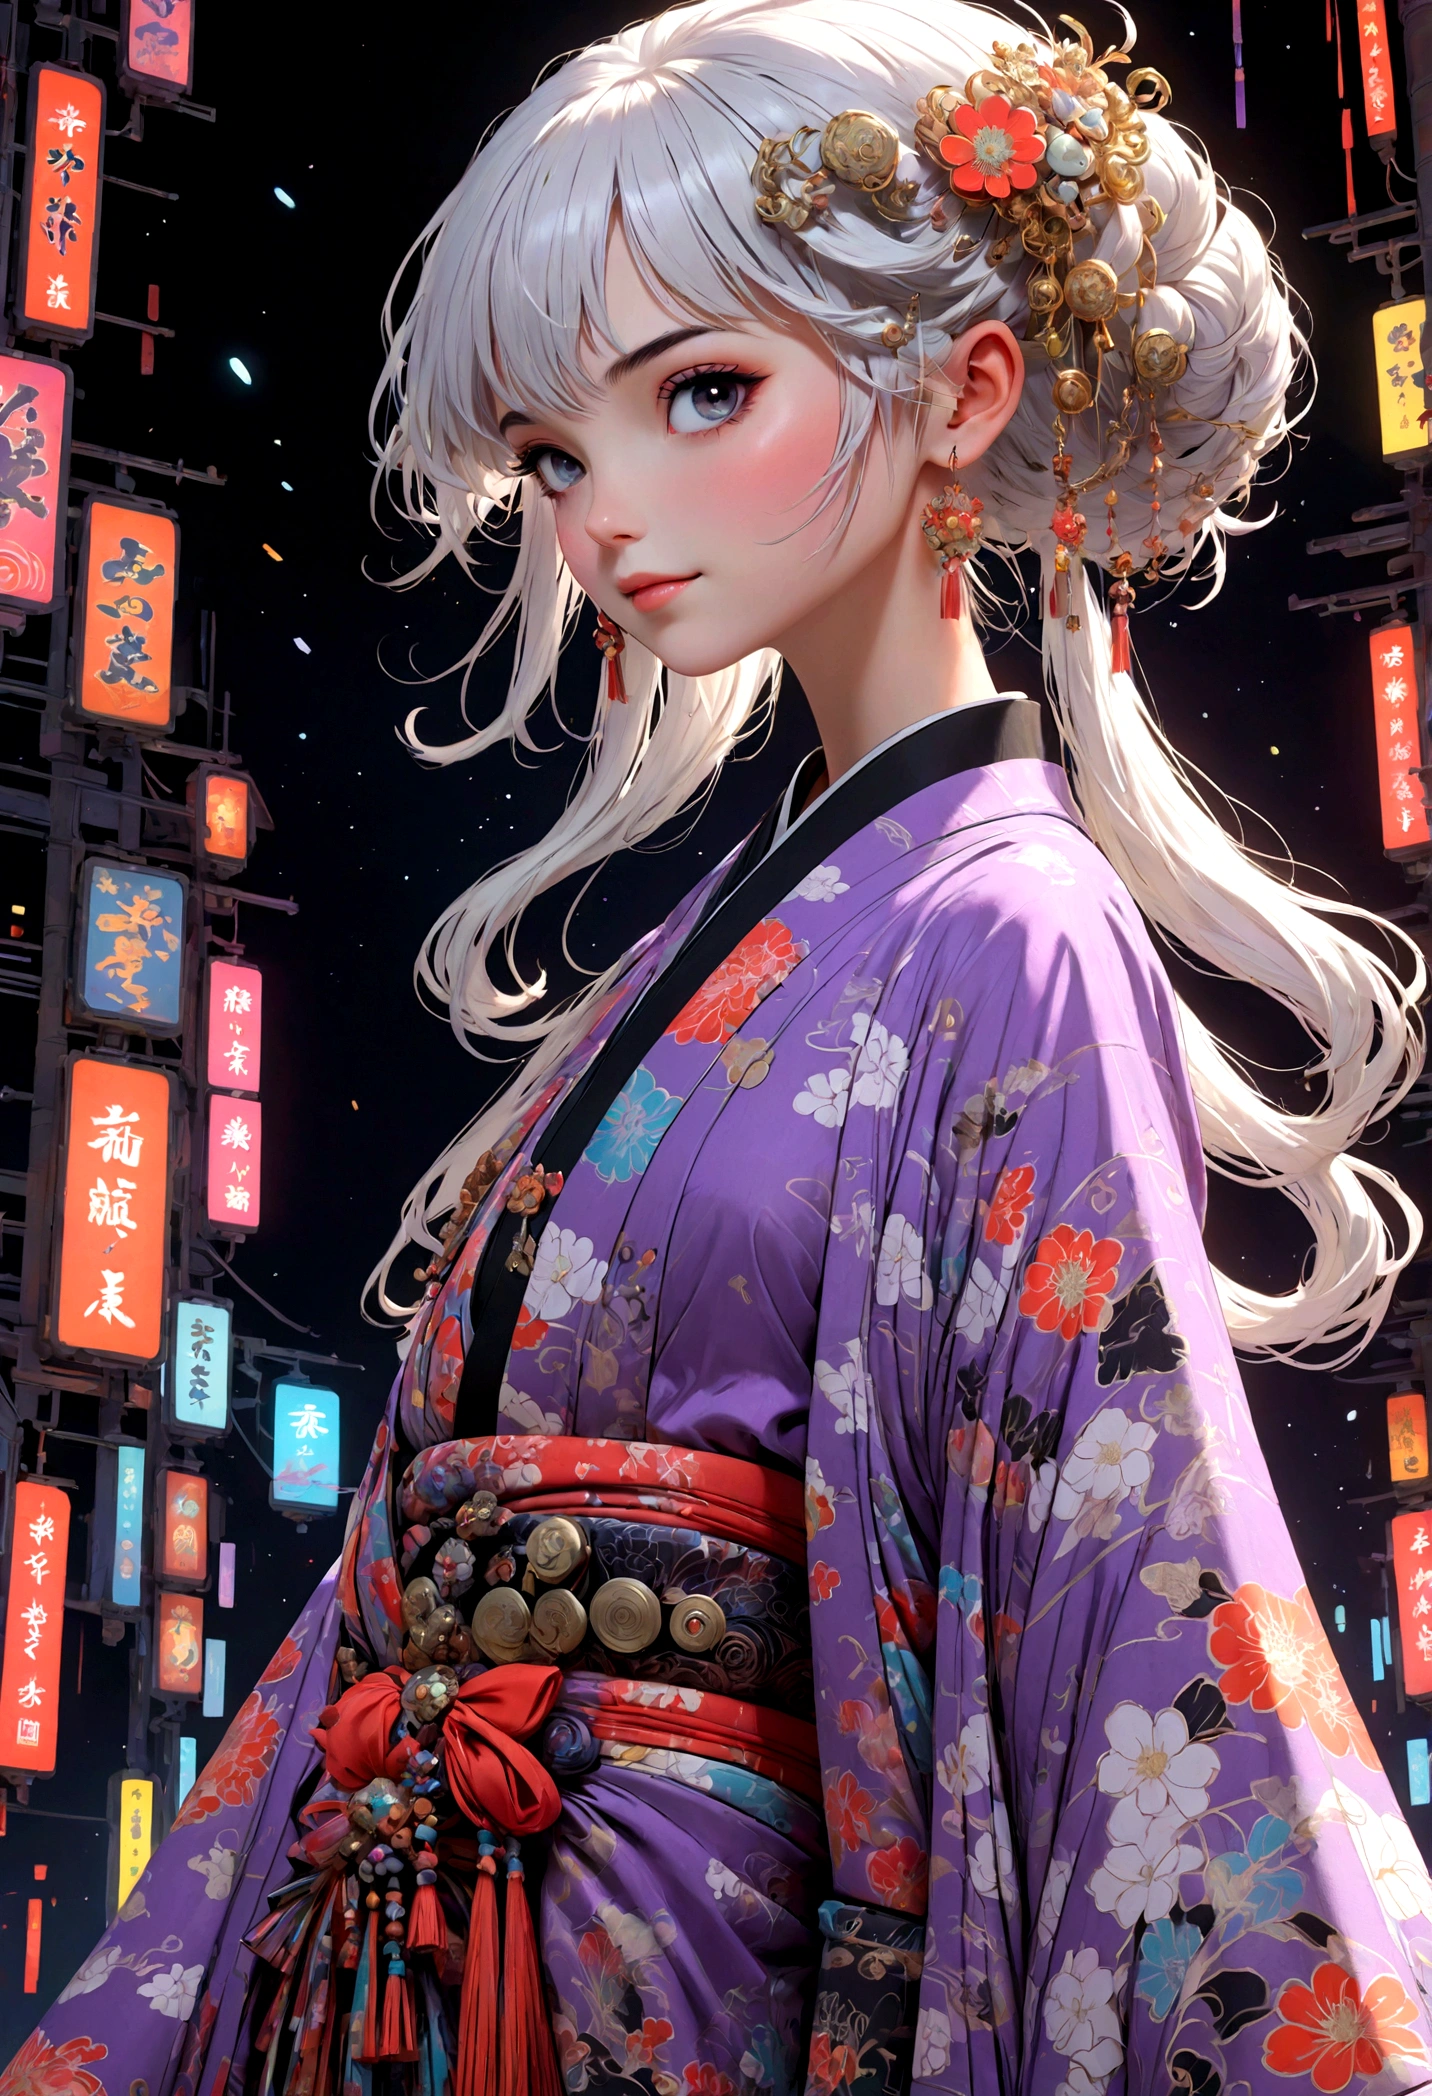 (Ultra-detailed face, looking away:1.3), (Fantasy Illustration with Gothic & Ukiyo-e & Comic Art), (The scene is viewed from below, looking up:1.2), (Full Body, A young-aged woman with white hair, blunt bangs, Very long disheveled hair, lavender eyes), (She walks down the runway in a daring pose, smiling and wearing an avant-garde, futuristic neon-colored Japanese kimono), (In the background, her figure from various angles is projected on a screen by projection mapping. The fashion show venue is filled with lights of various colors flitting about)